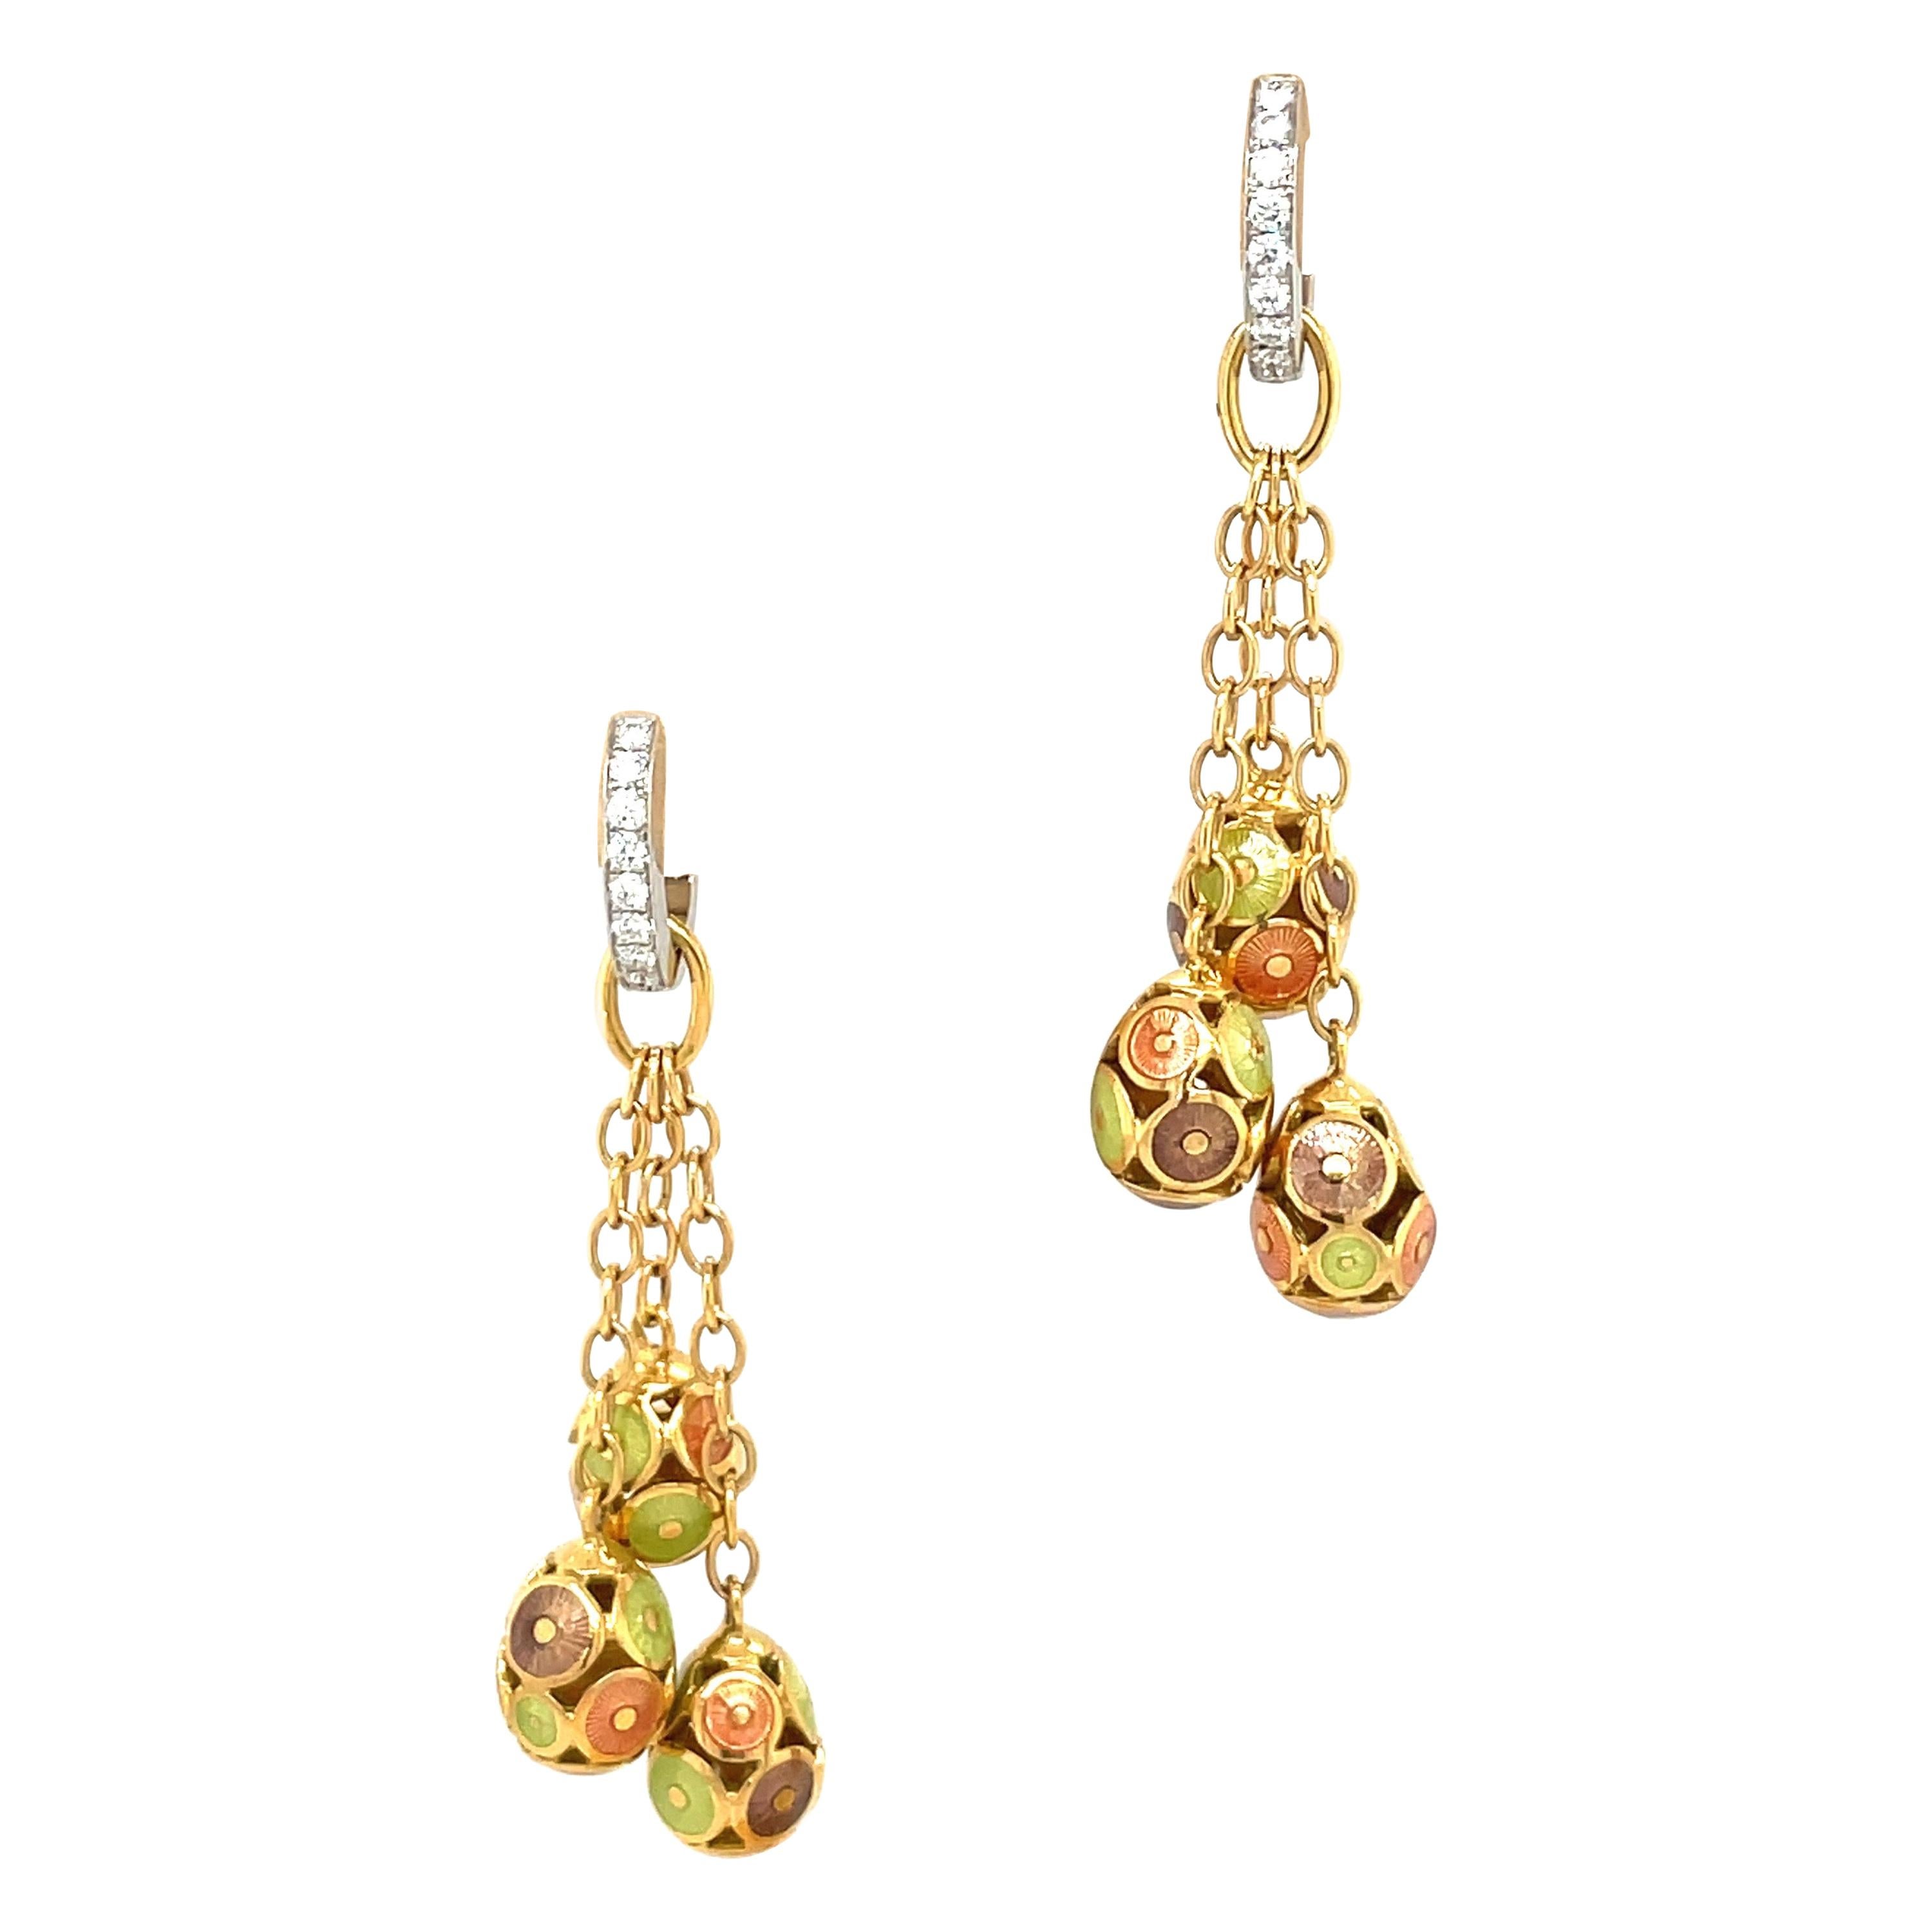 Faberge 18KT Yellow & White Gold Diamond 0.27Ct. & Enamel Eggs Hanging Earrings For Sale